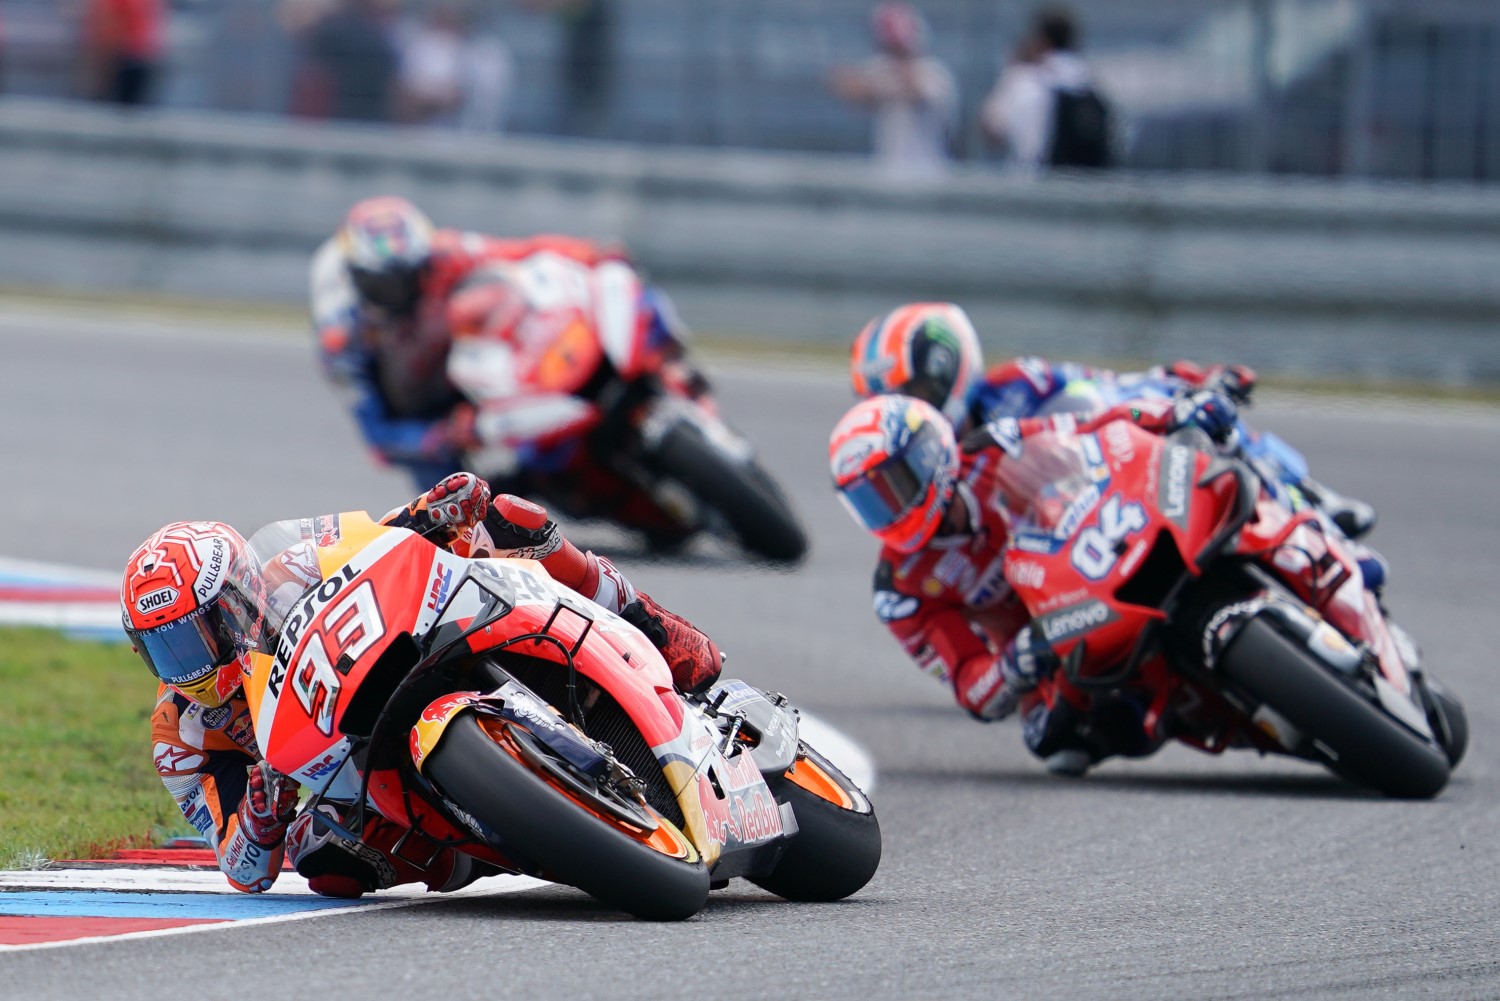 Marquez leads Dovizioso from start to finish